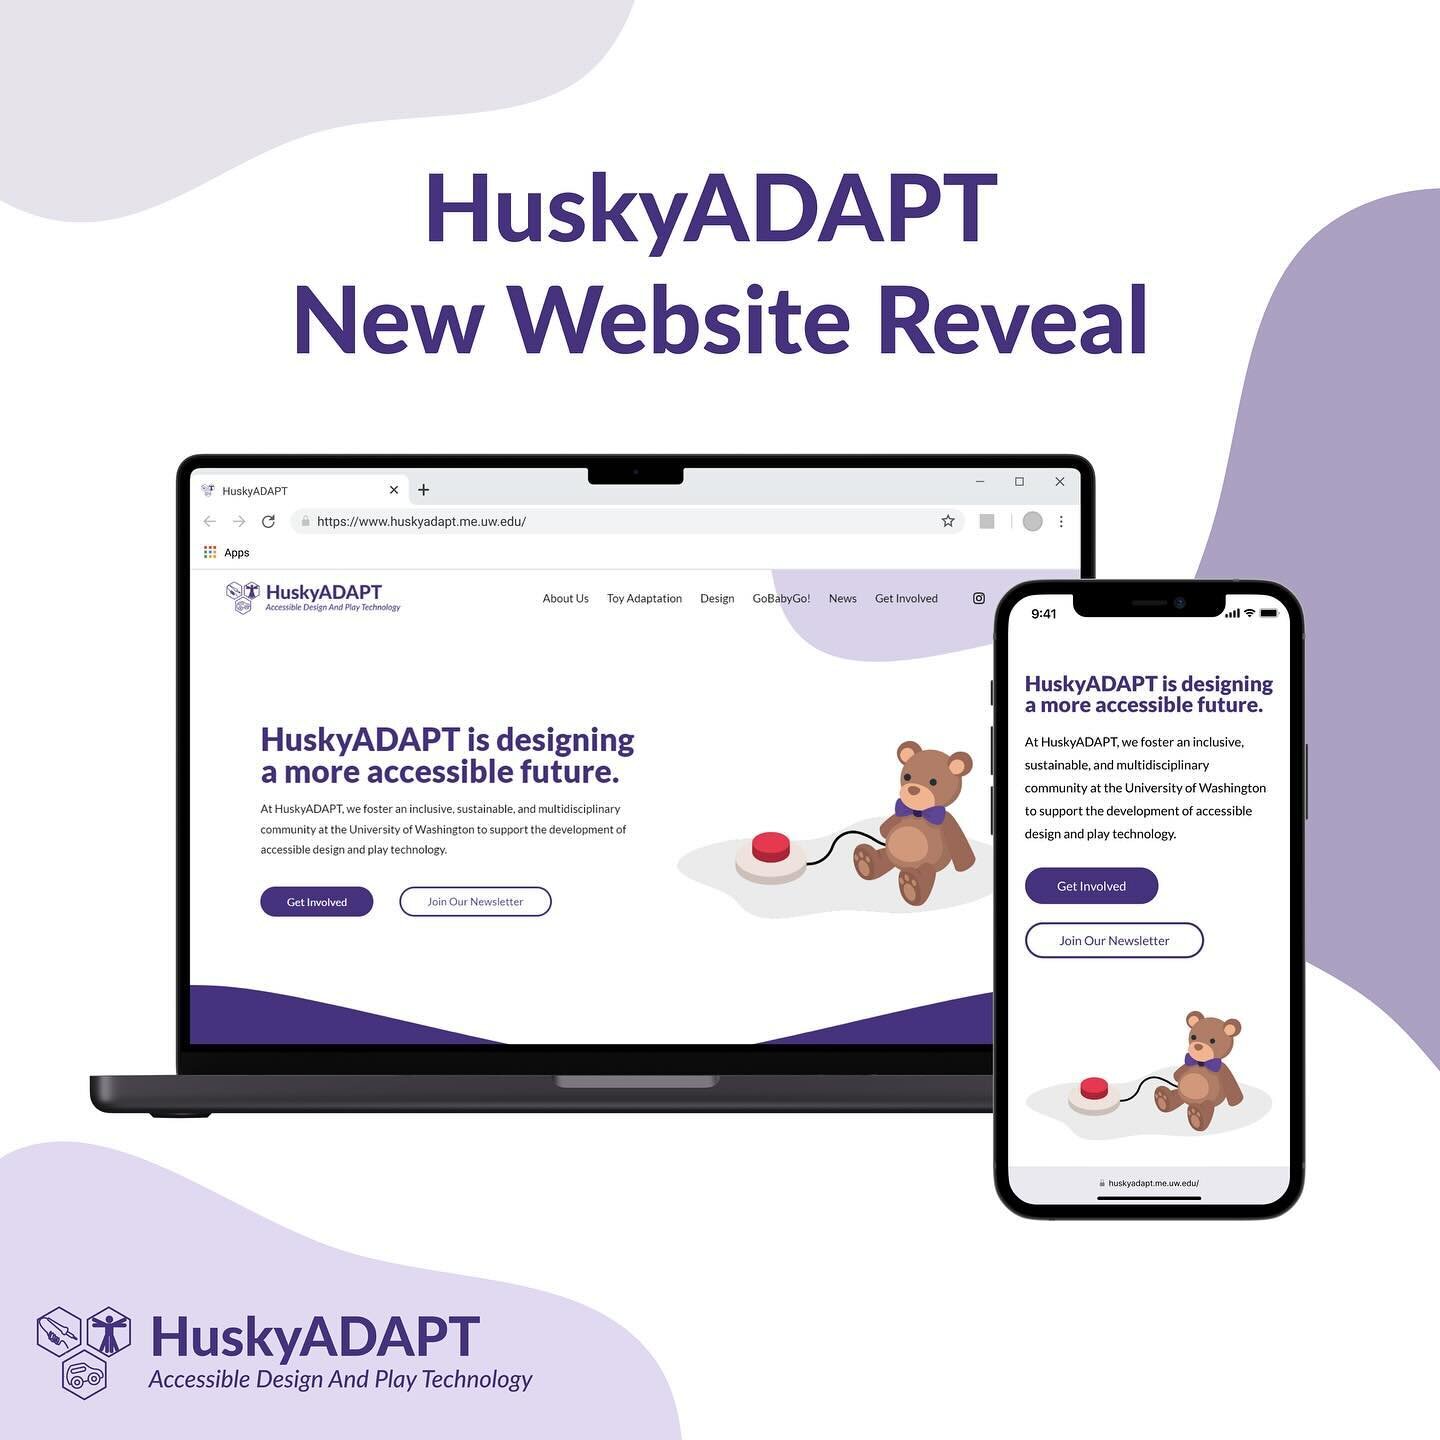 We&rsquo;re so excited to announce that HuskyADAPT now has a newly redesigned website! Shout out to our amazing communications chairs for working super hard on this project &mdash; you can check it out at https://www.huskyadapt.me.uw.edu/ (link in bi